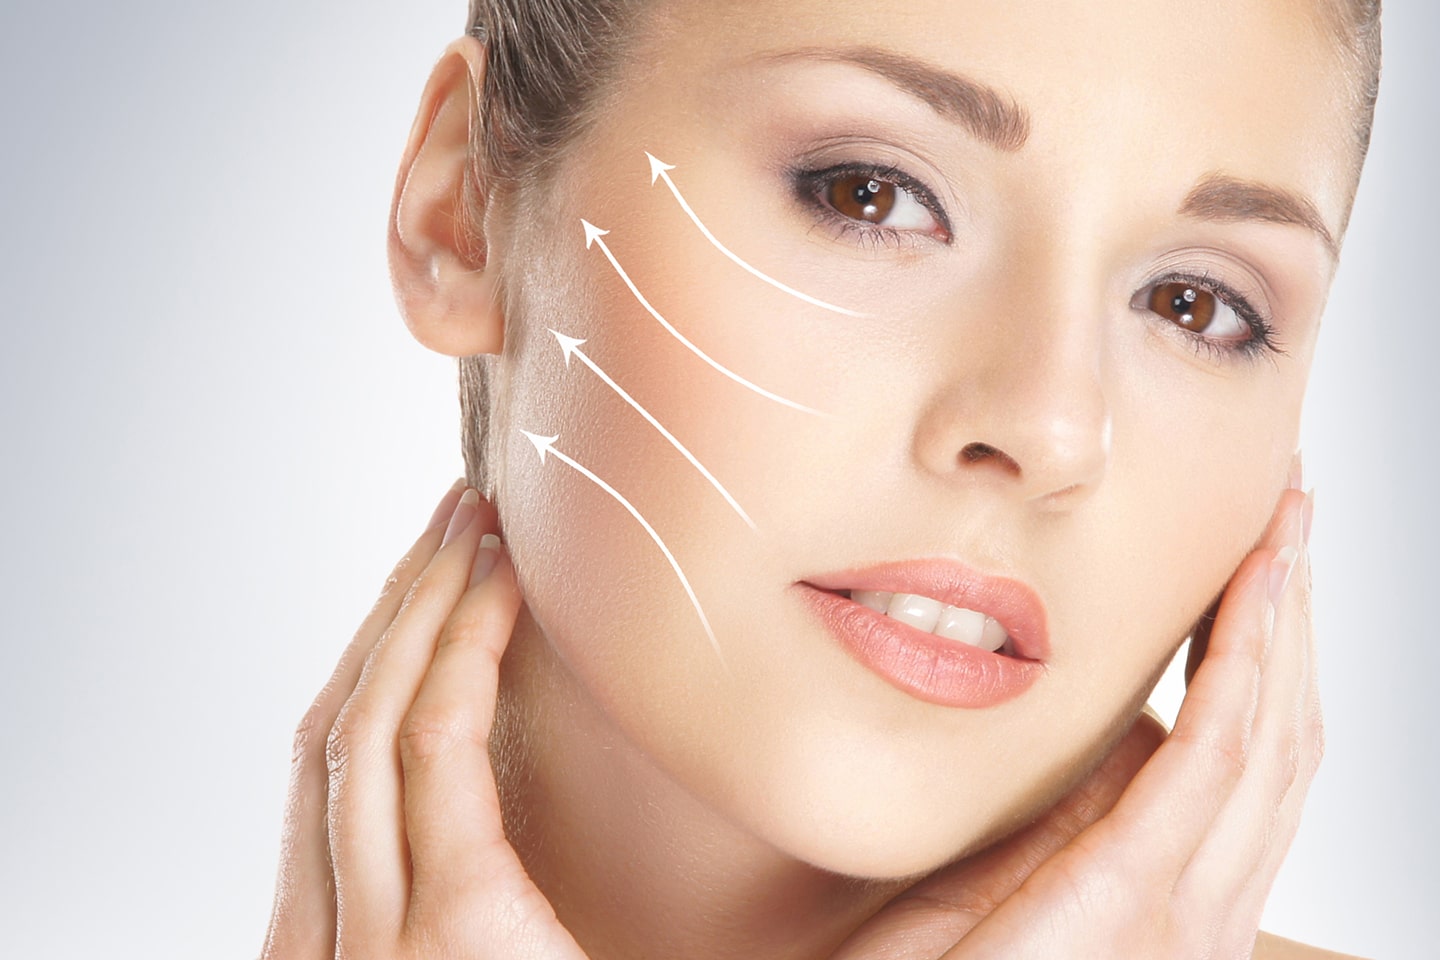 Plastic Surgery in Tijuana: What Results Can You Expect?